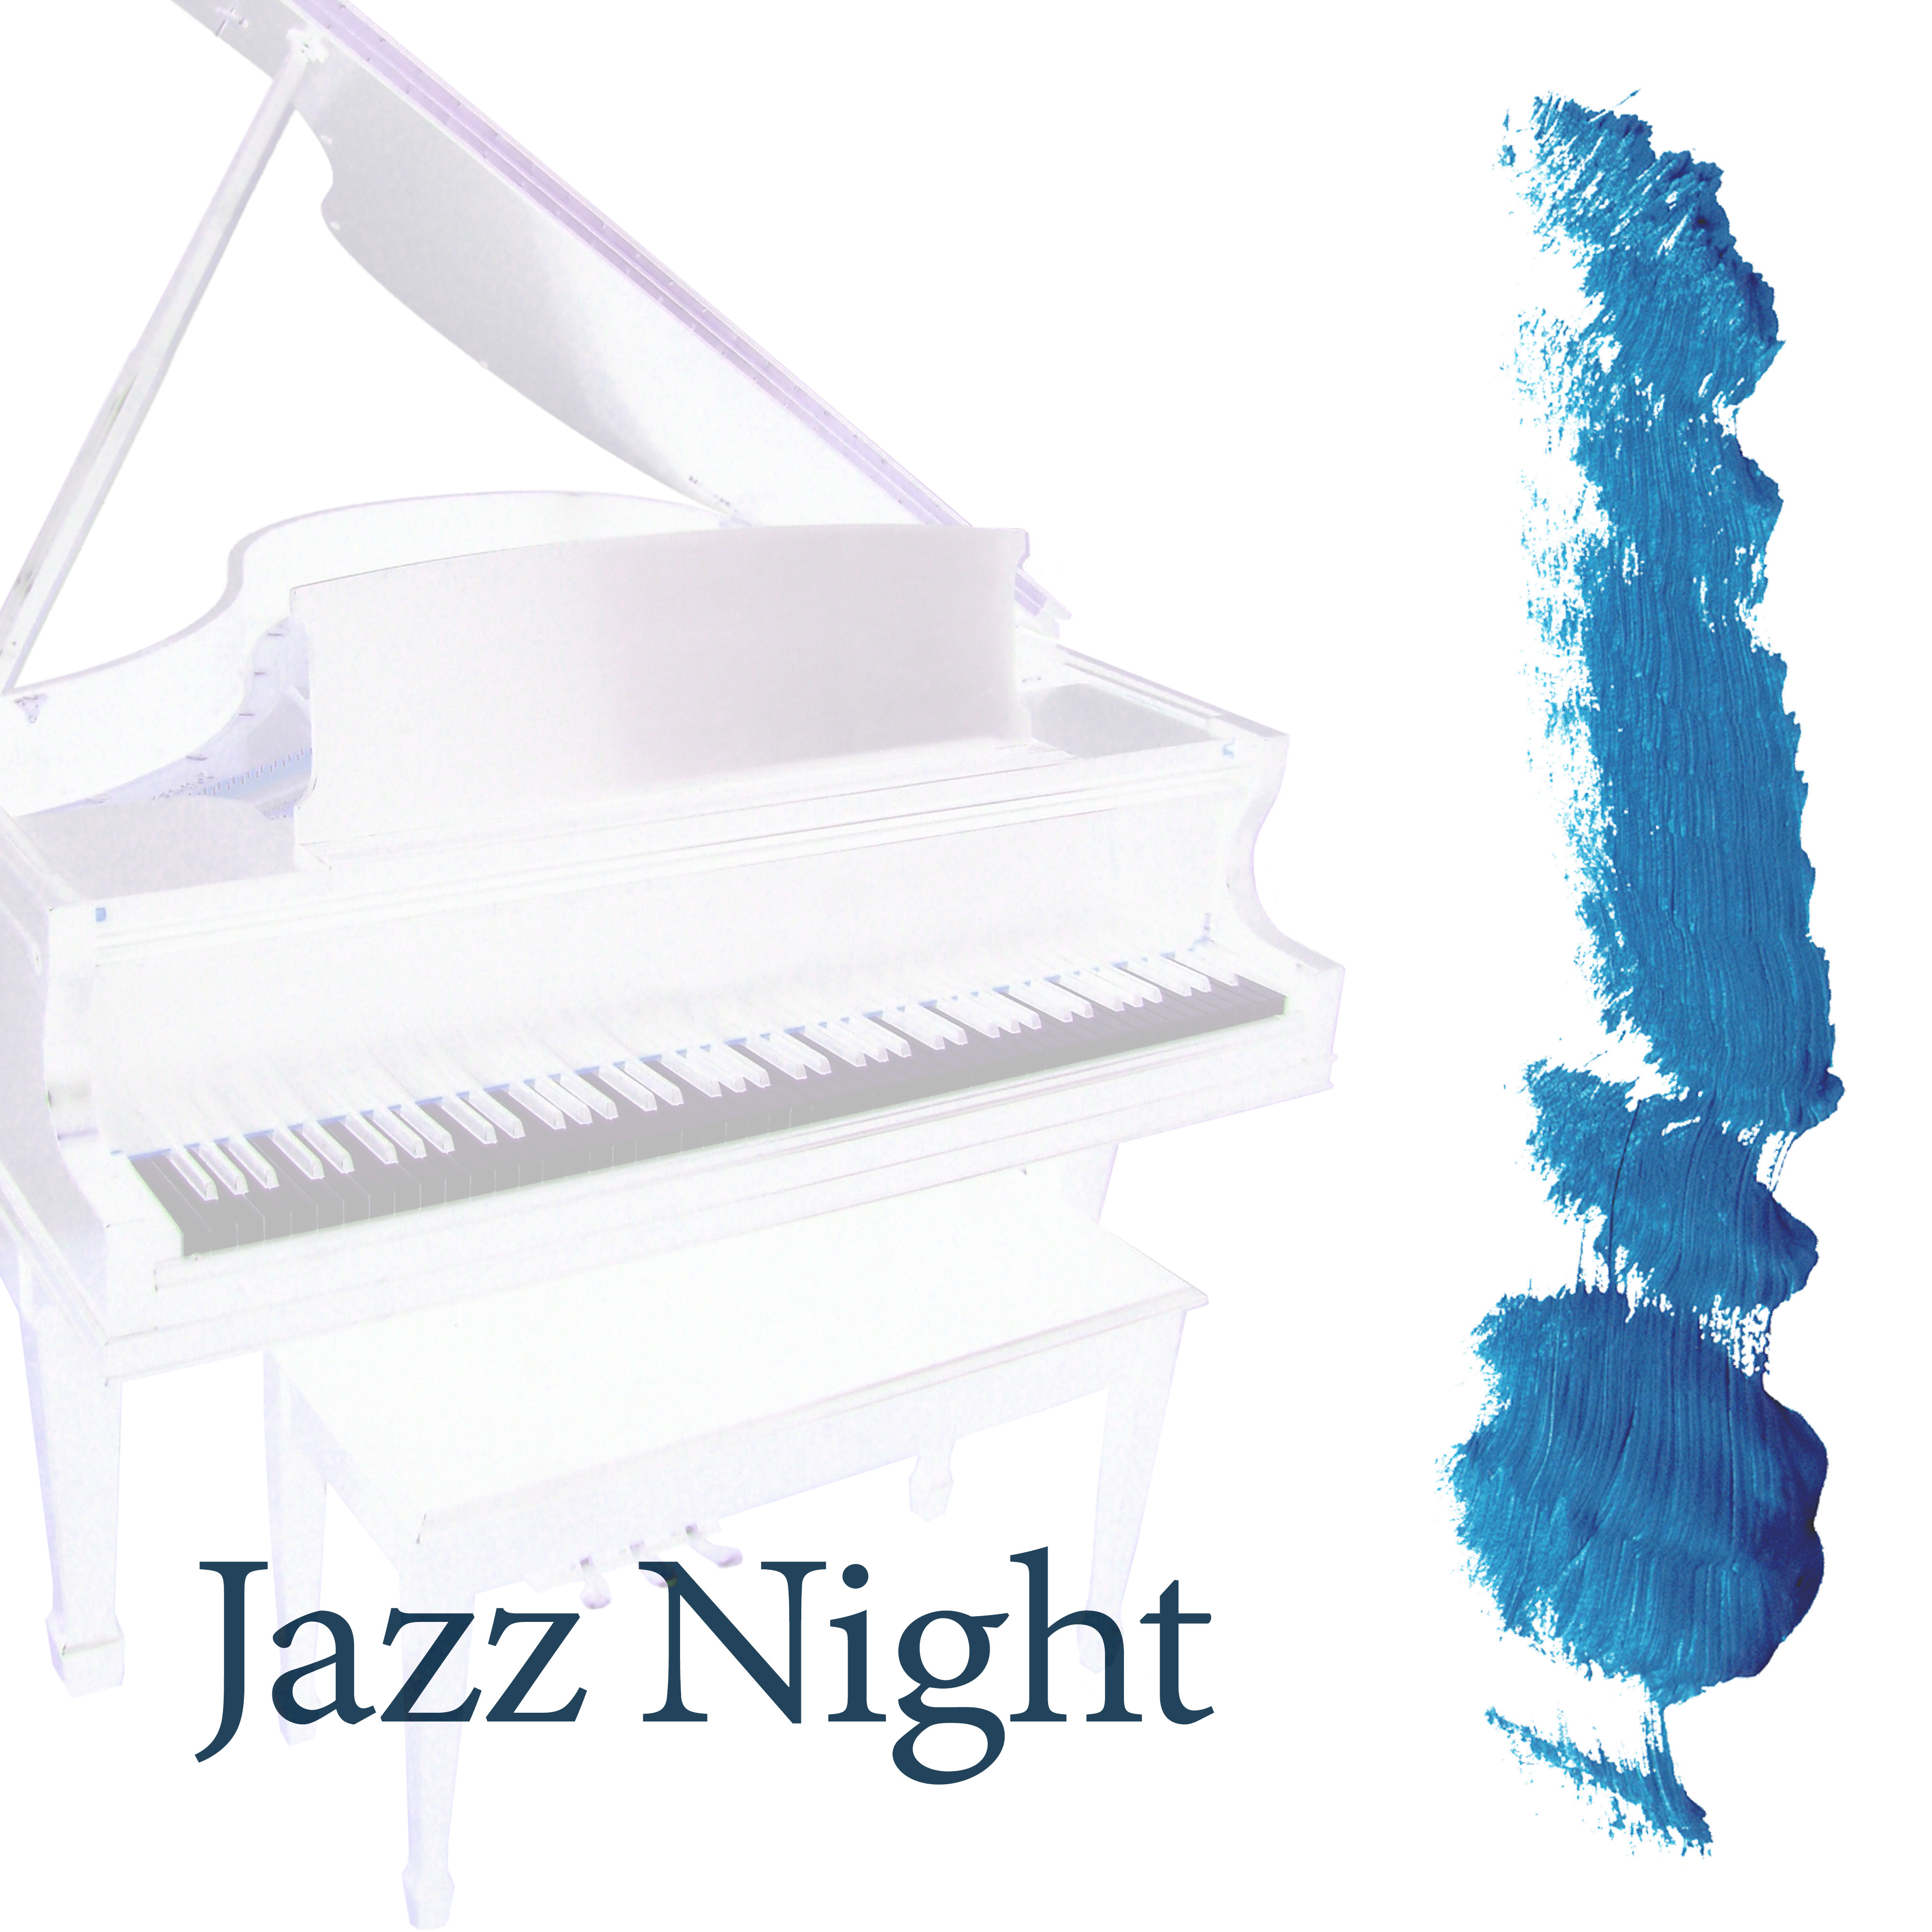 Jazz Night - Cafe Lounge, Background Music for Relaxation, Jazz By Night